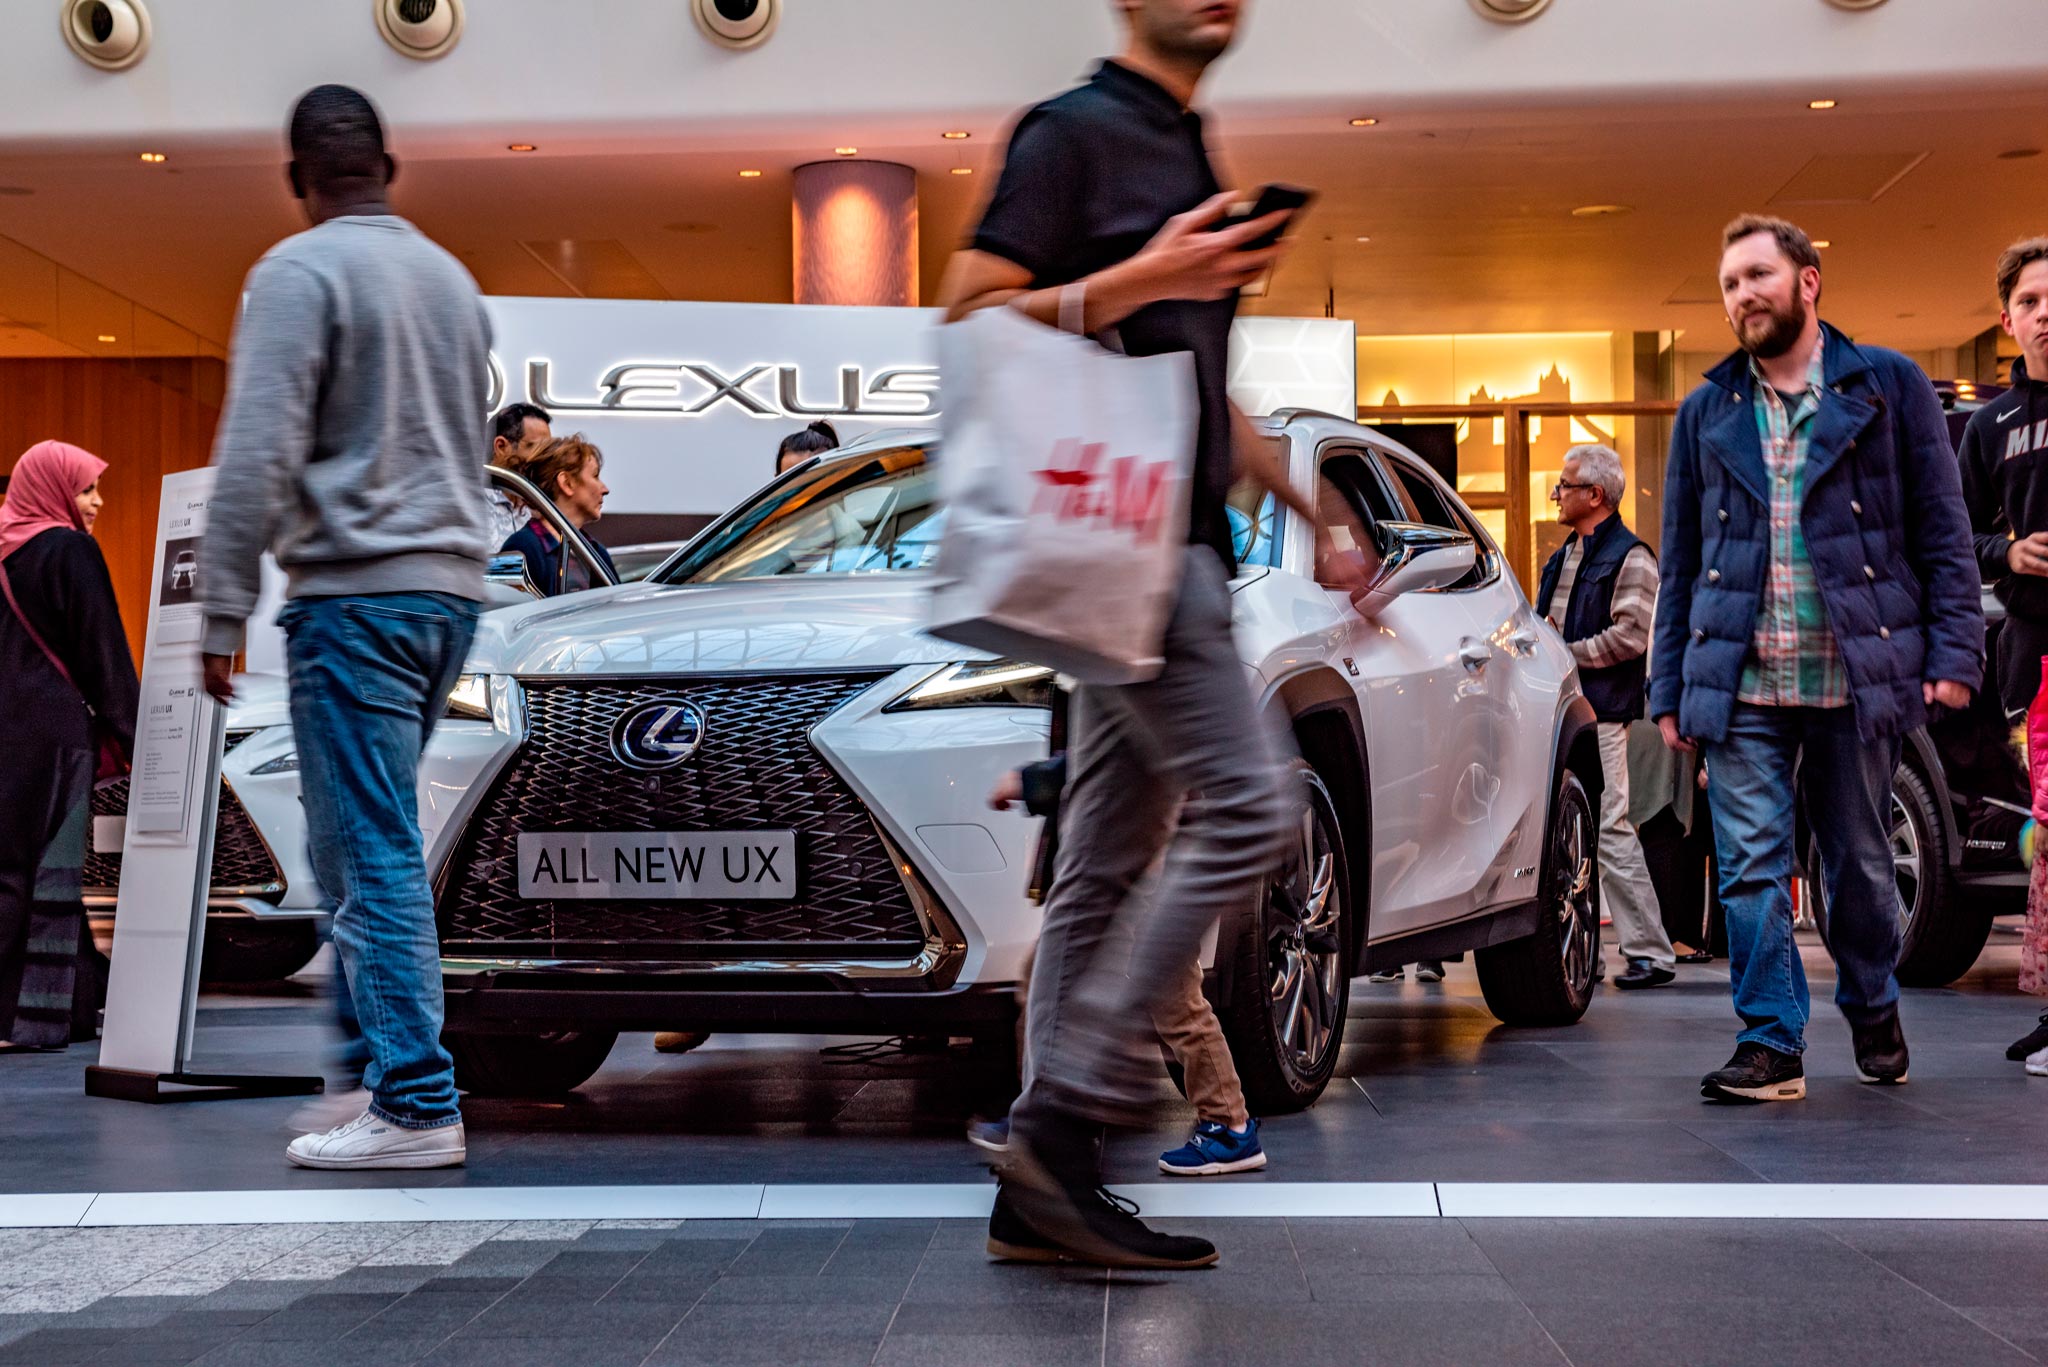 A dynamic scene captured by Wright Content, showcasing shoppers passing by a Lexus car at its event in Westfield Shopping Centre, London. This long shutter speed shot encapsulates the energy and movement of the experiential marketing campaign. Wright Content excels in documenting impactful marketing experiences.